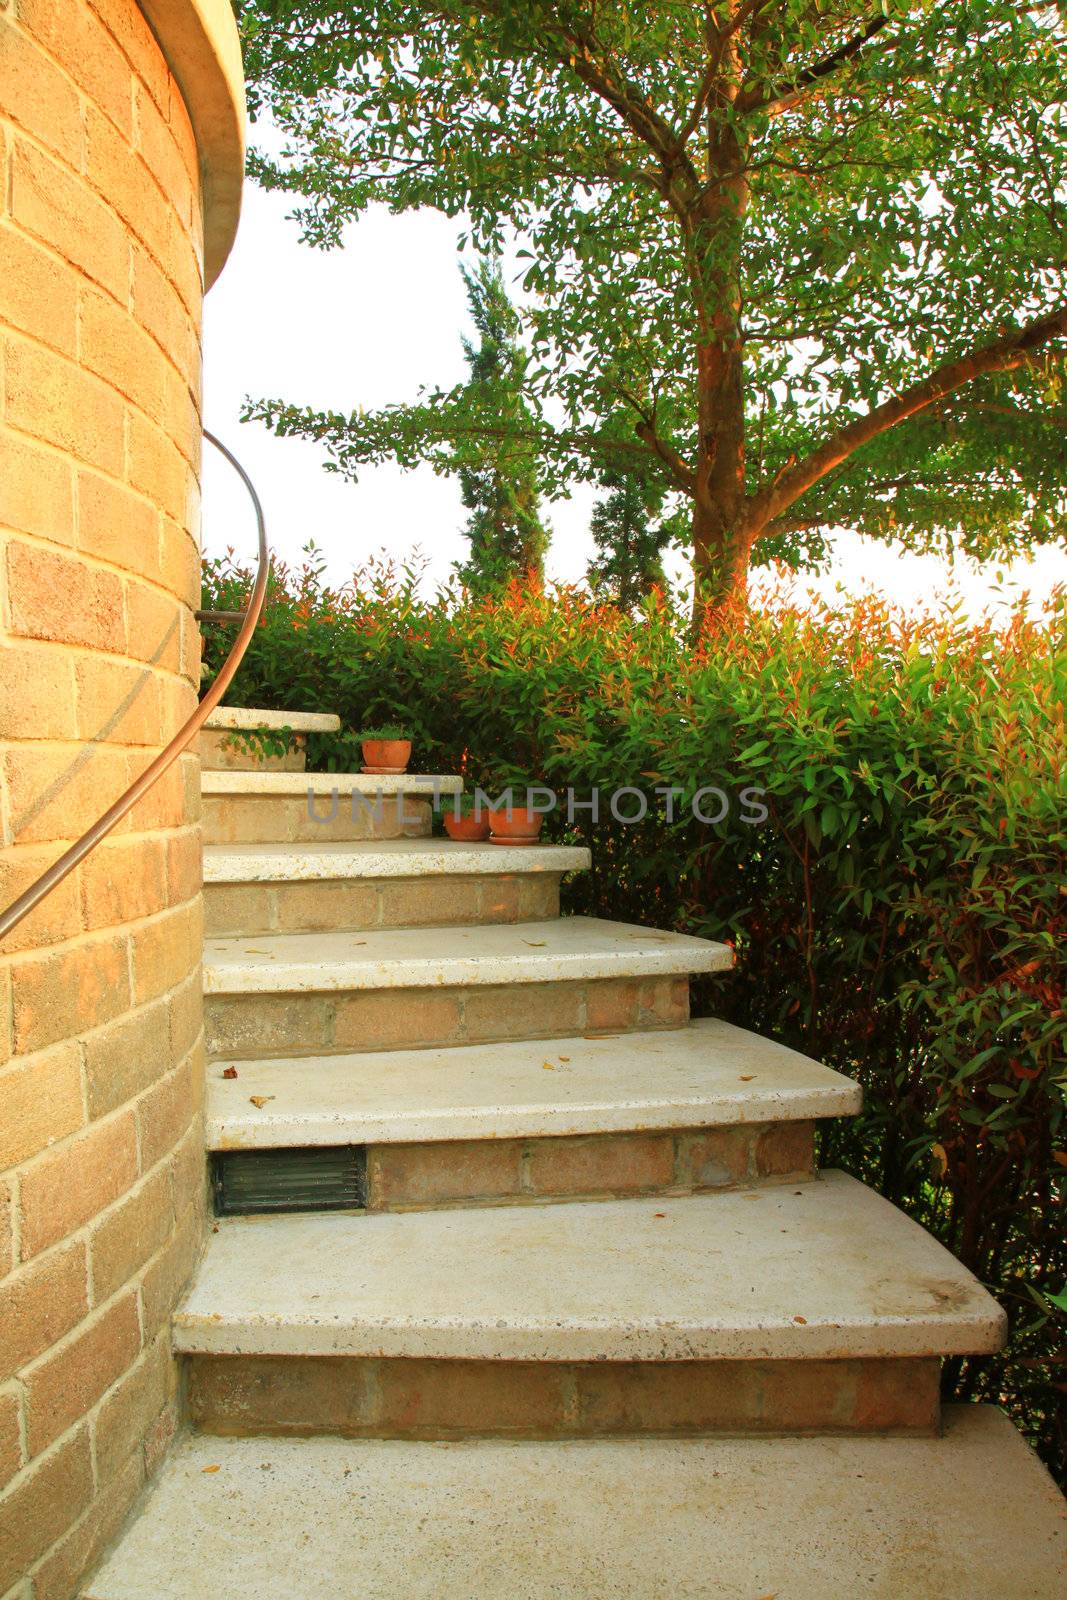 Staircase with flower and tree in garden by nuchylee